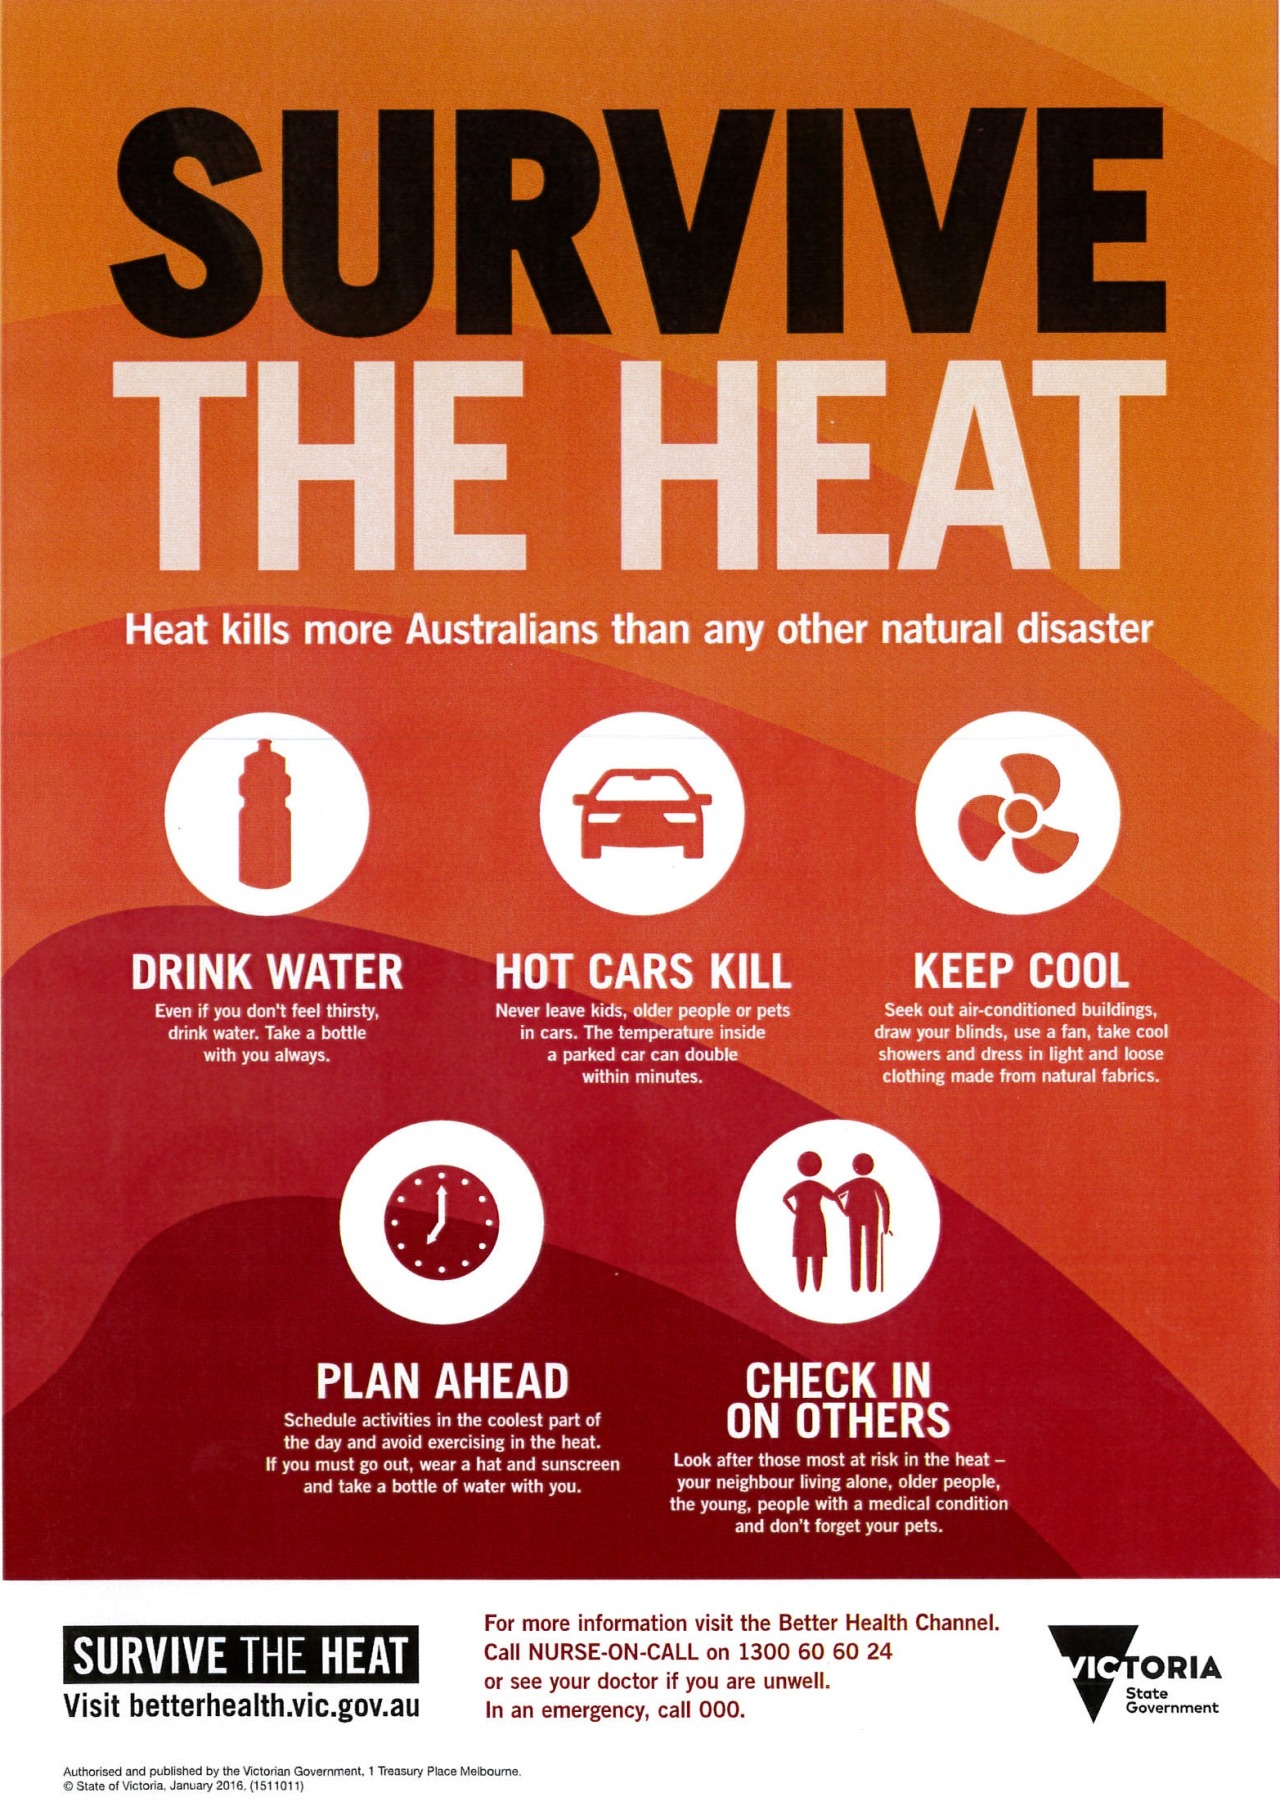 Extreme heat – why it's important to know the risks